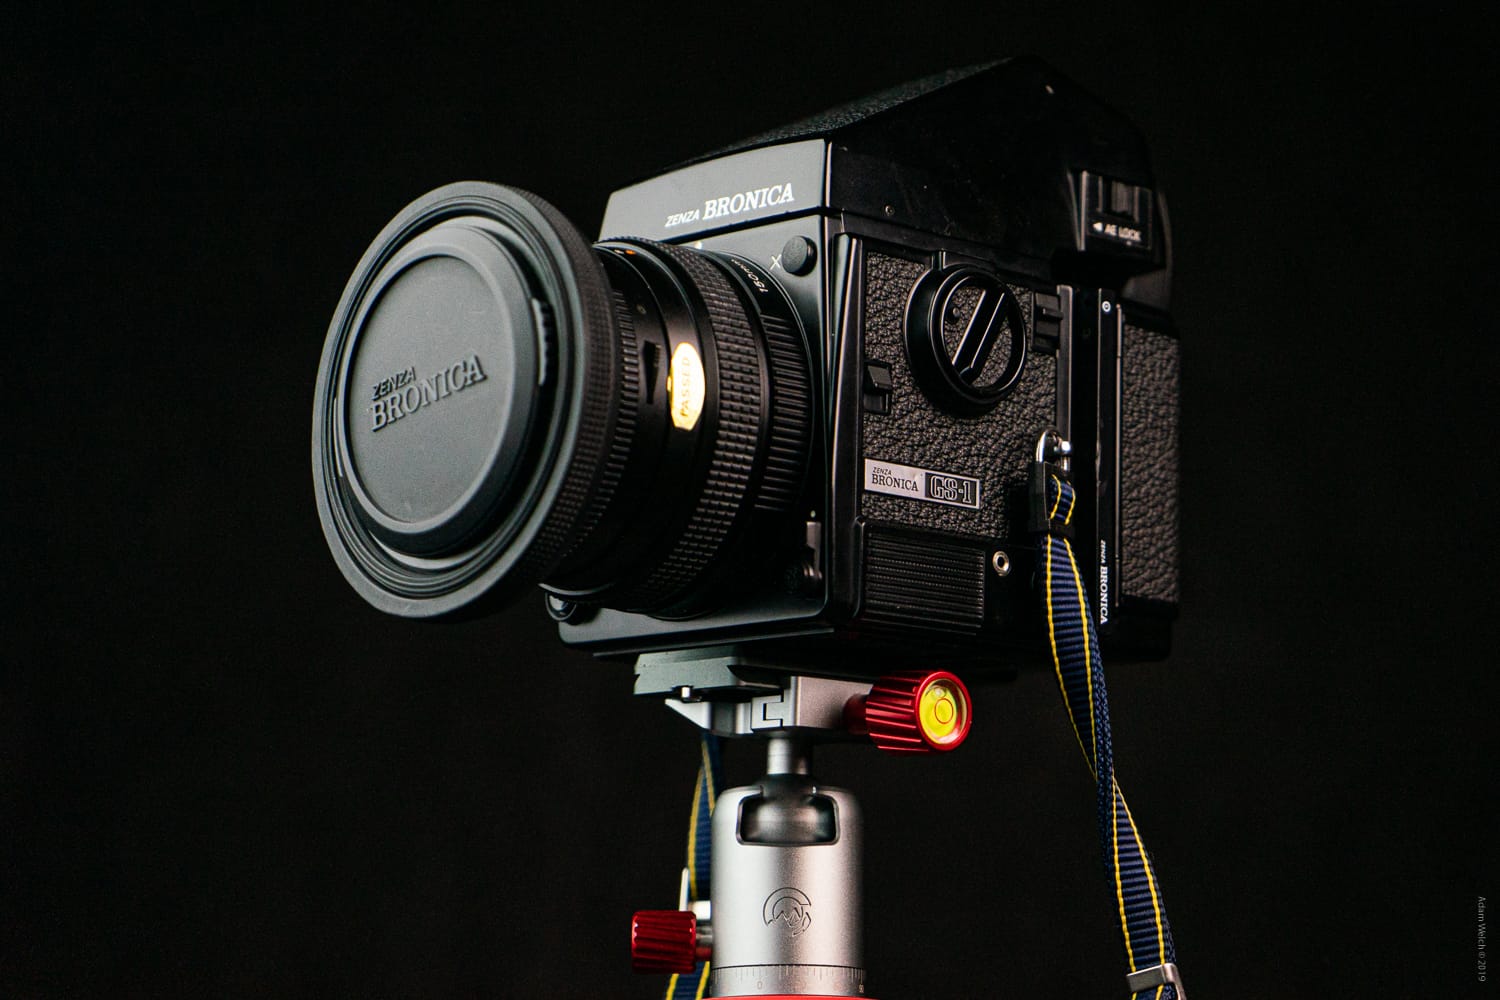 Hands-On Review of the Highline Mini Ballhead from Colorado Tripod Company